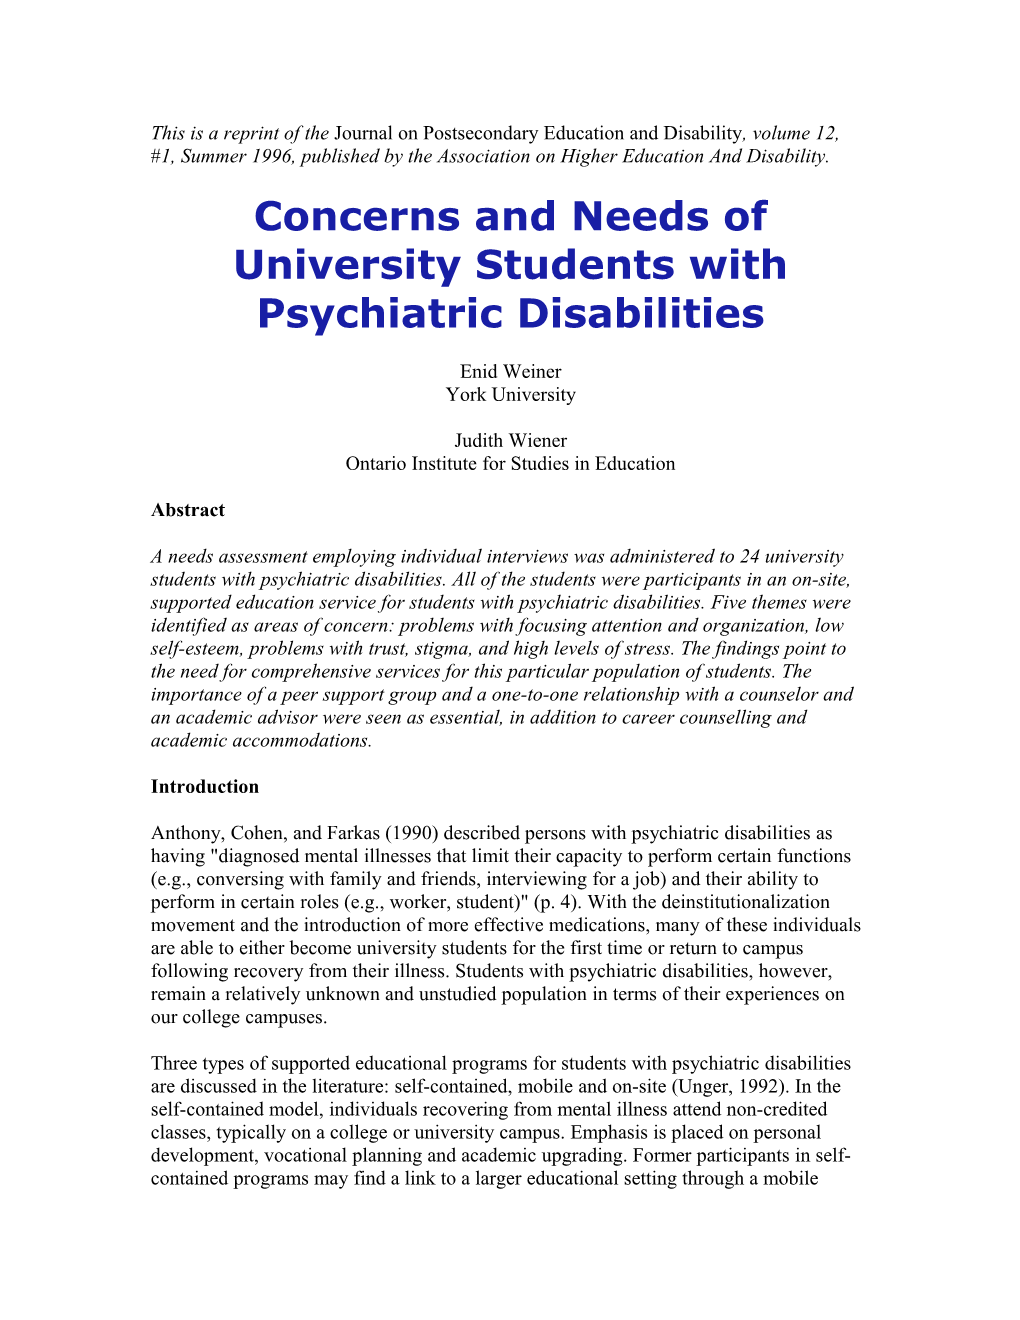 Concerns and Needs of University Students with Psychiatric Disabilities